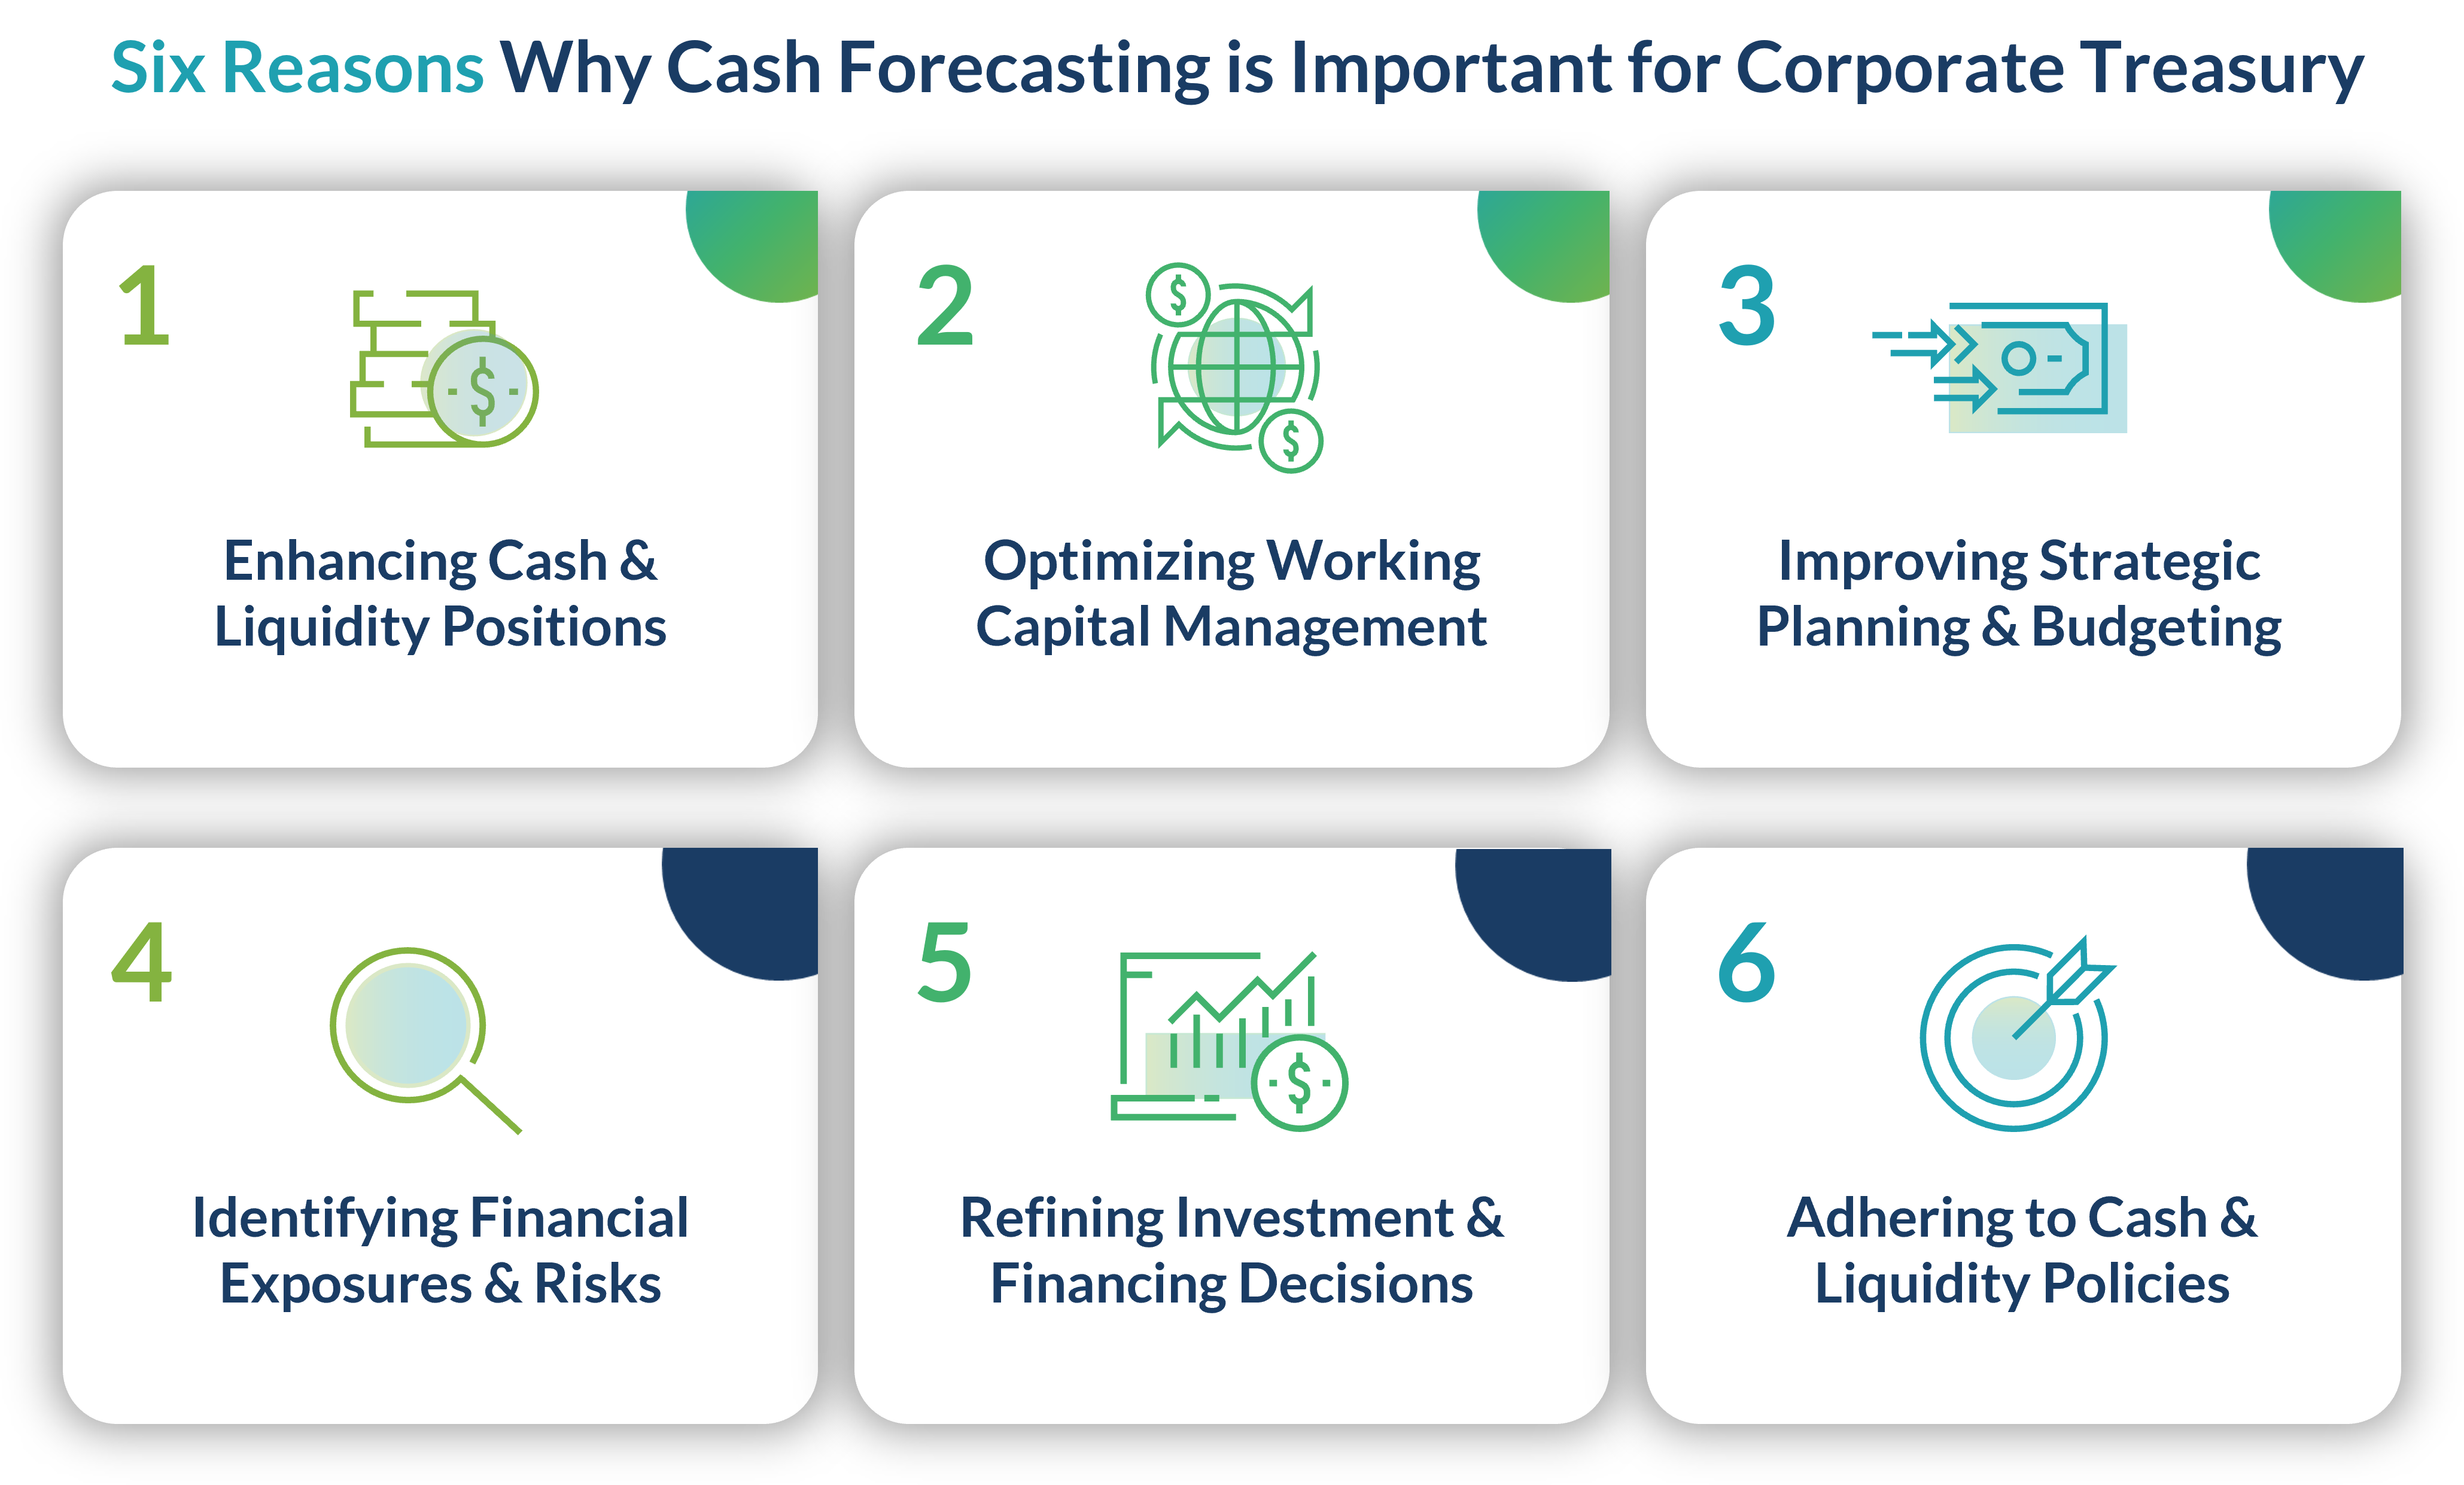 Six reasons why cash forecasting is important to corporate treasury.